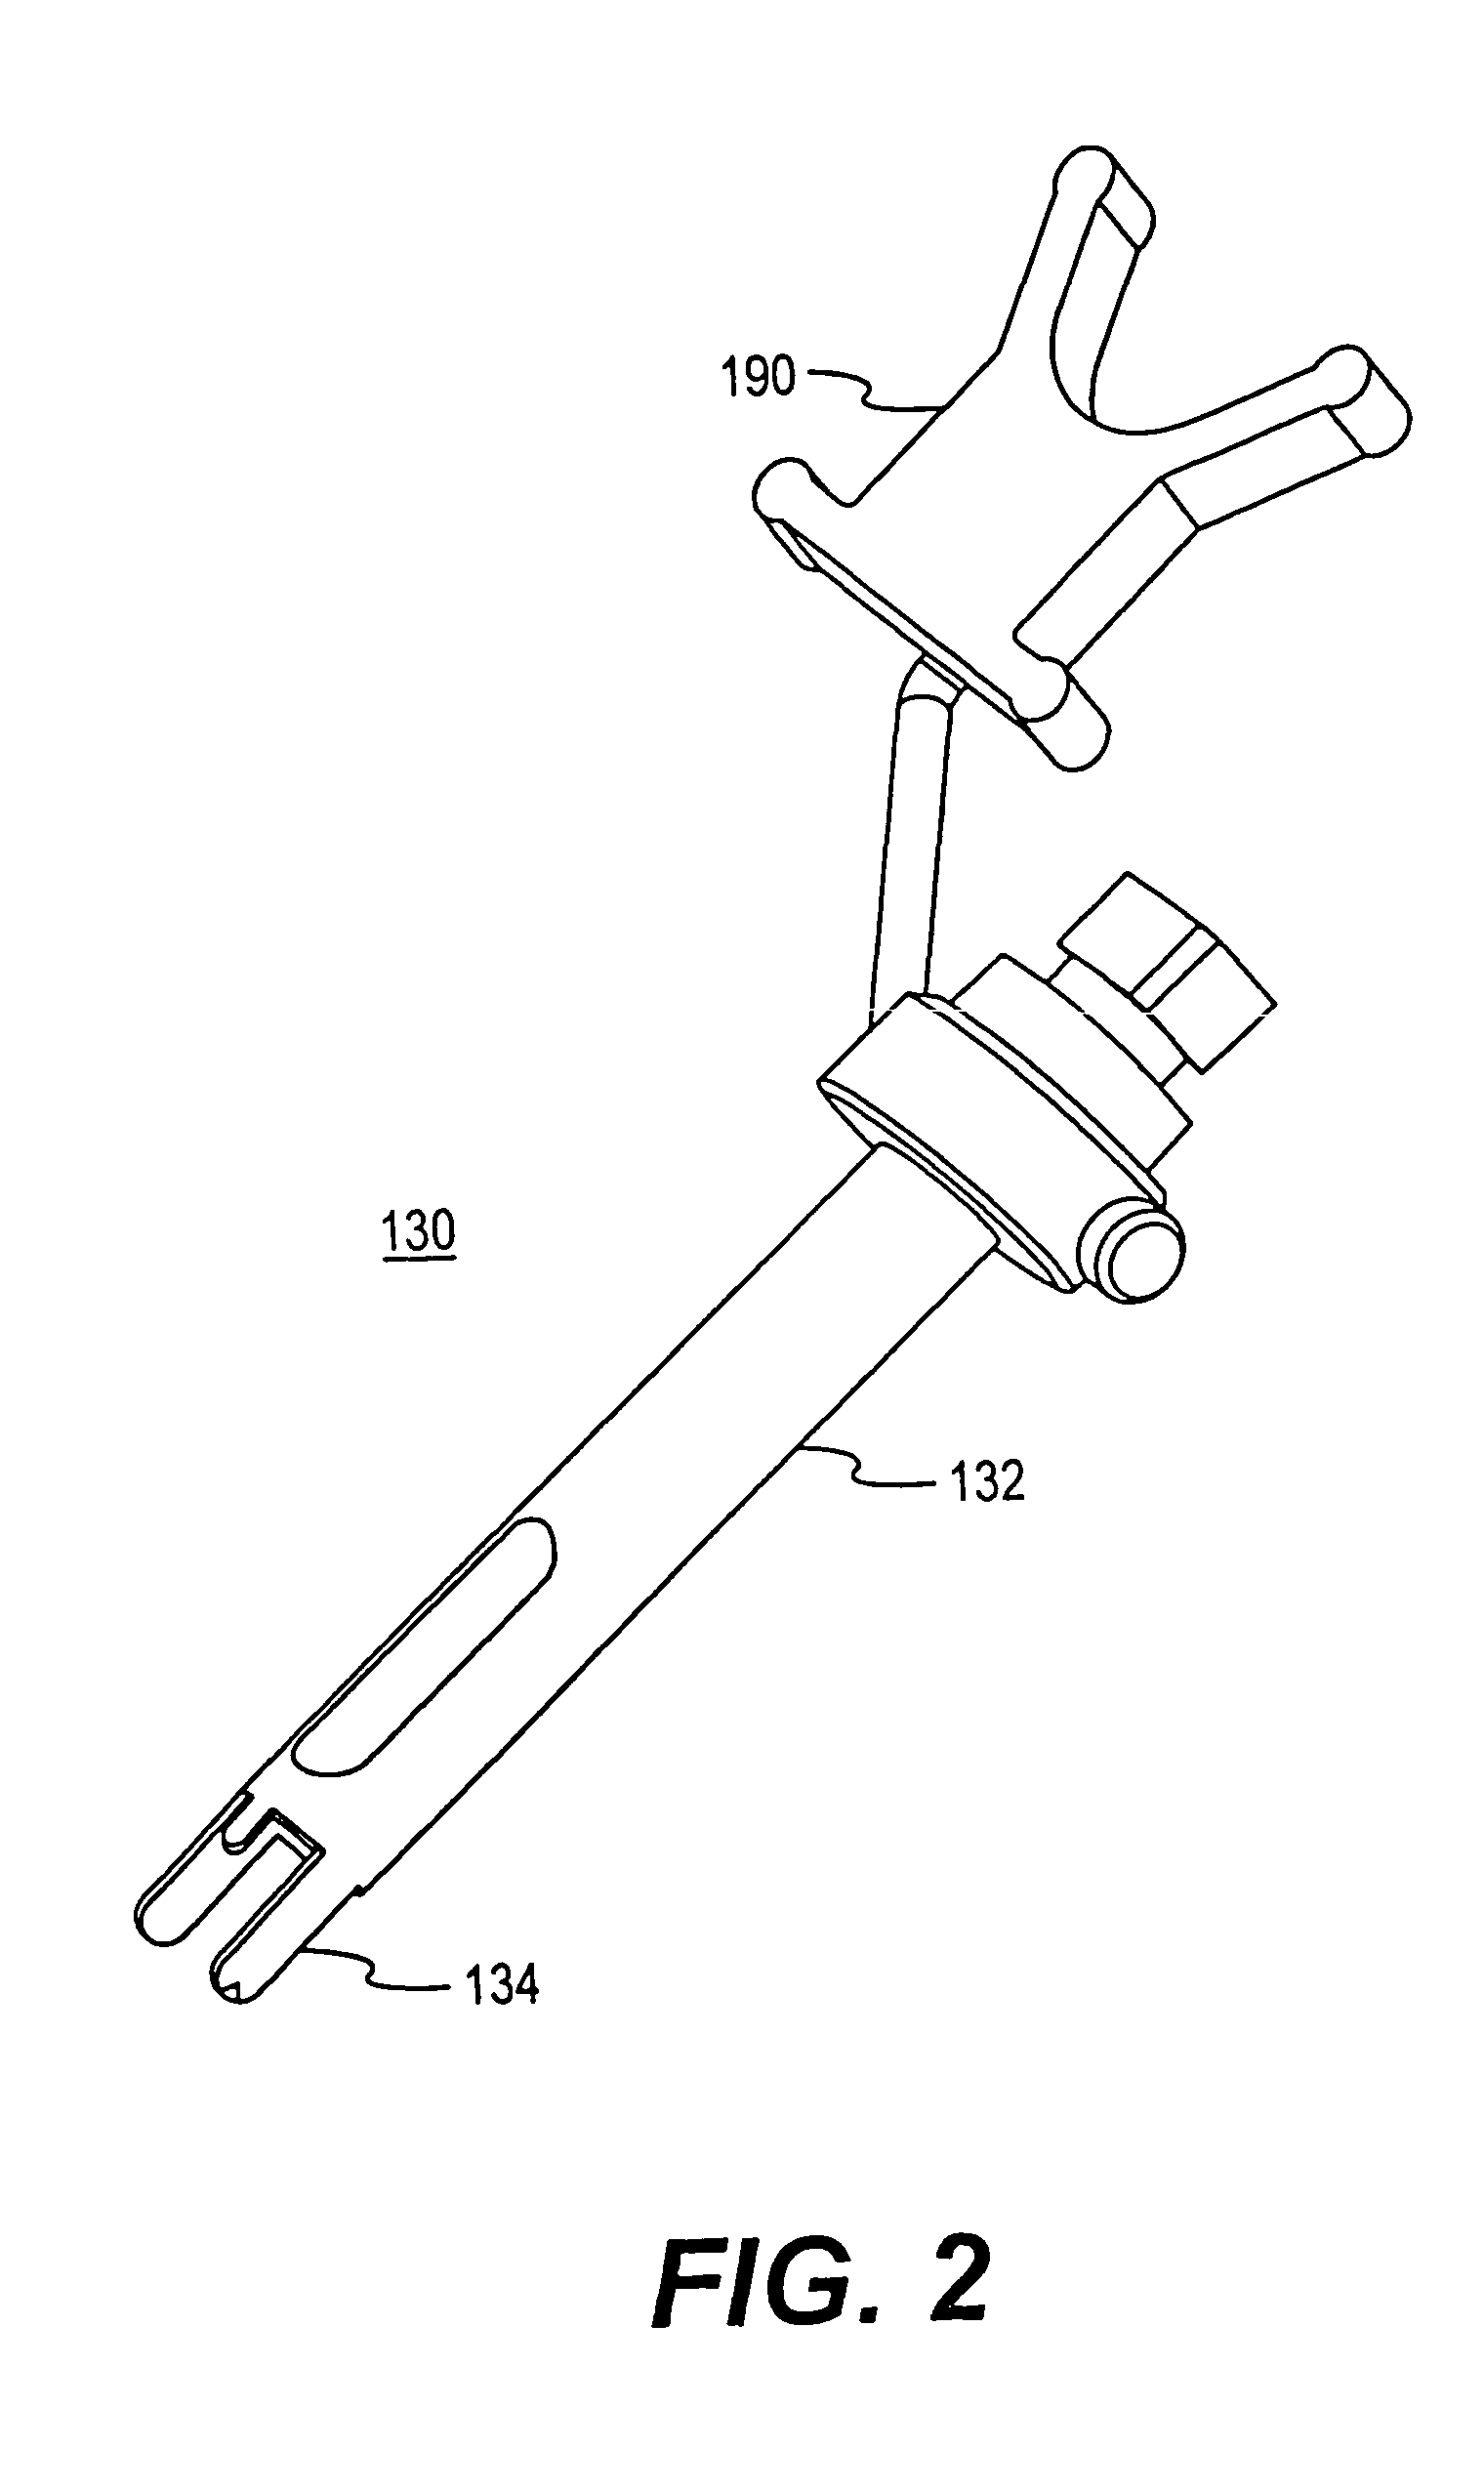 Image guided spinal surgery guide, system and method for use thereof